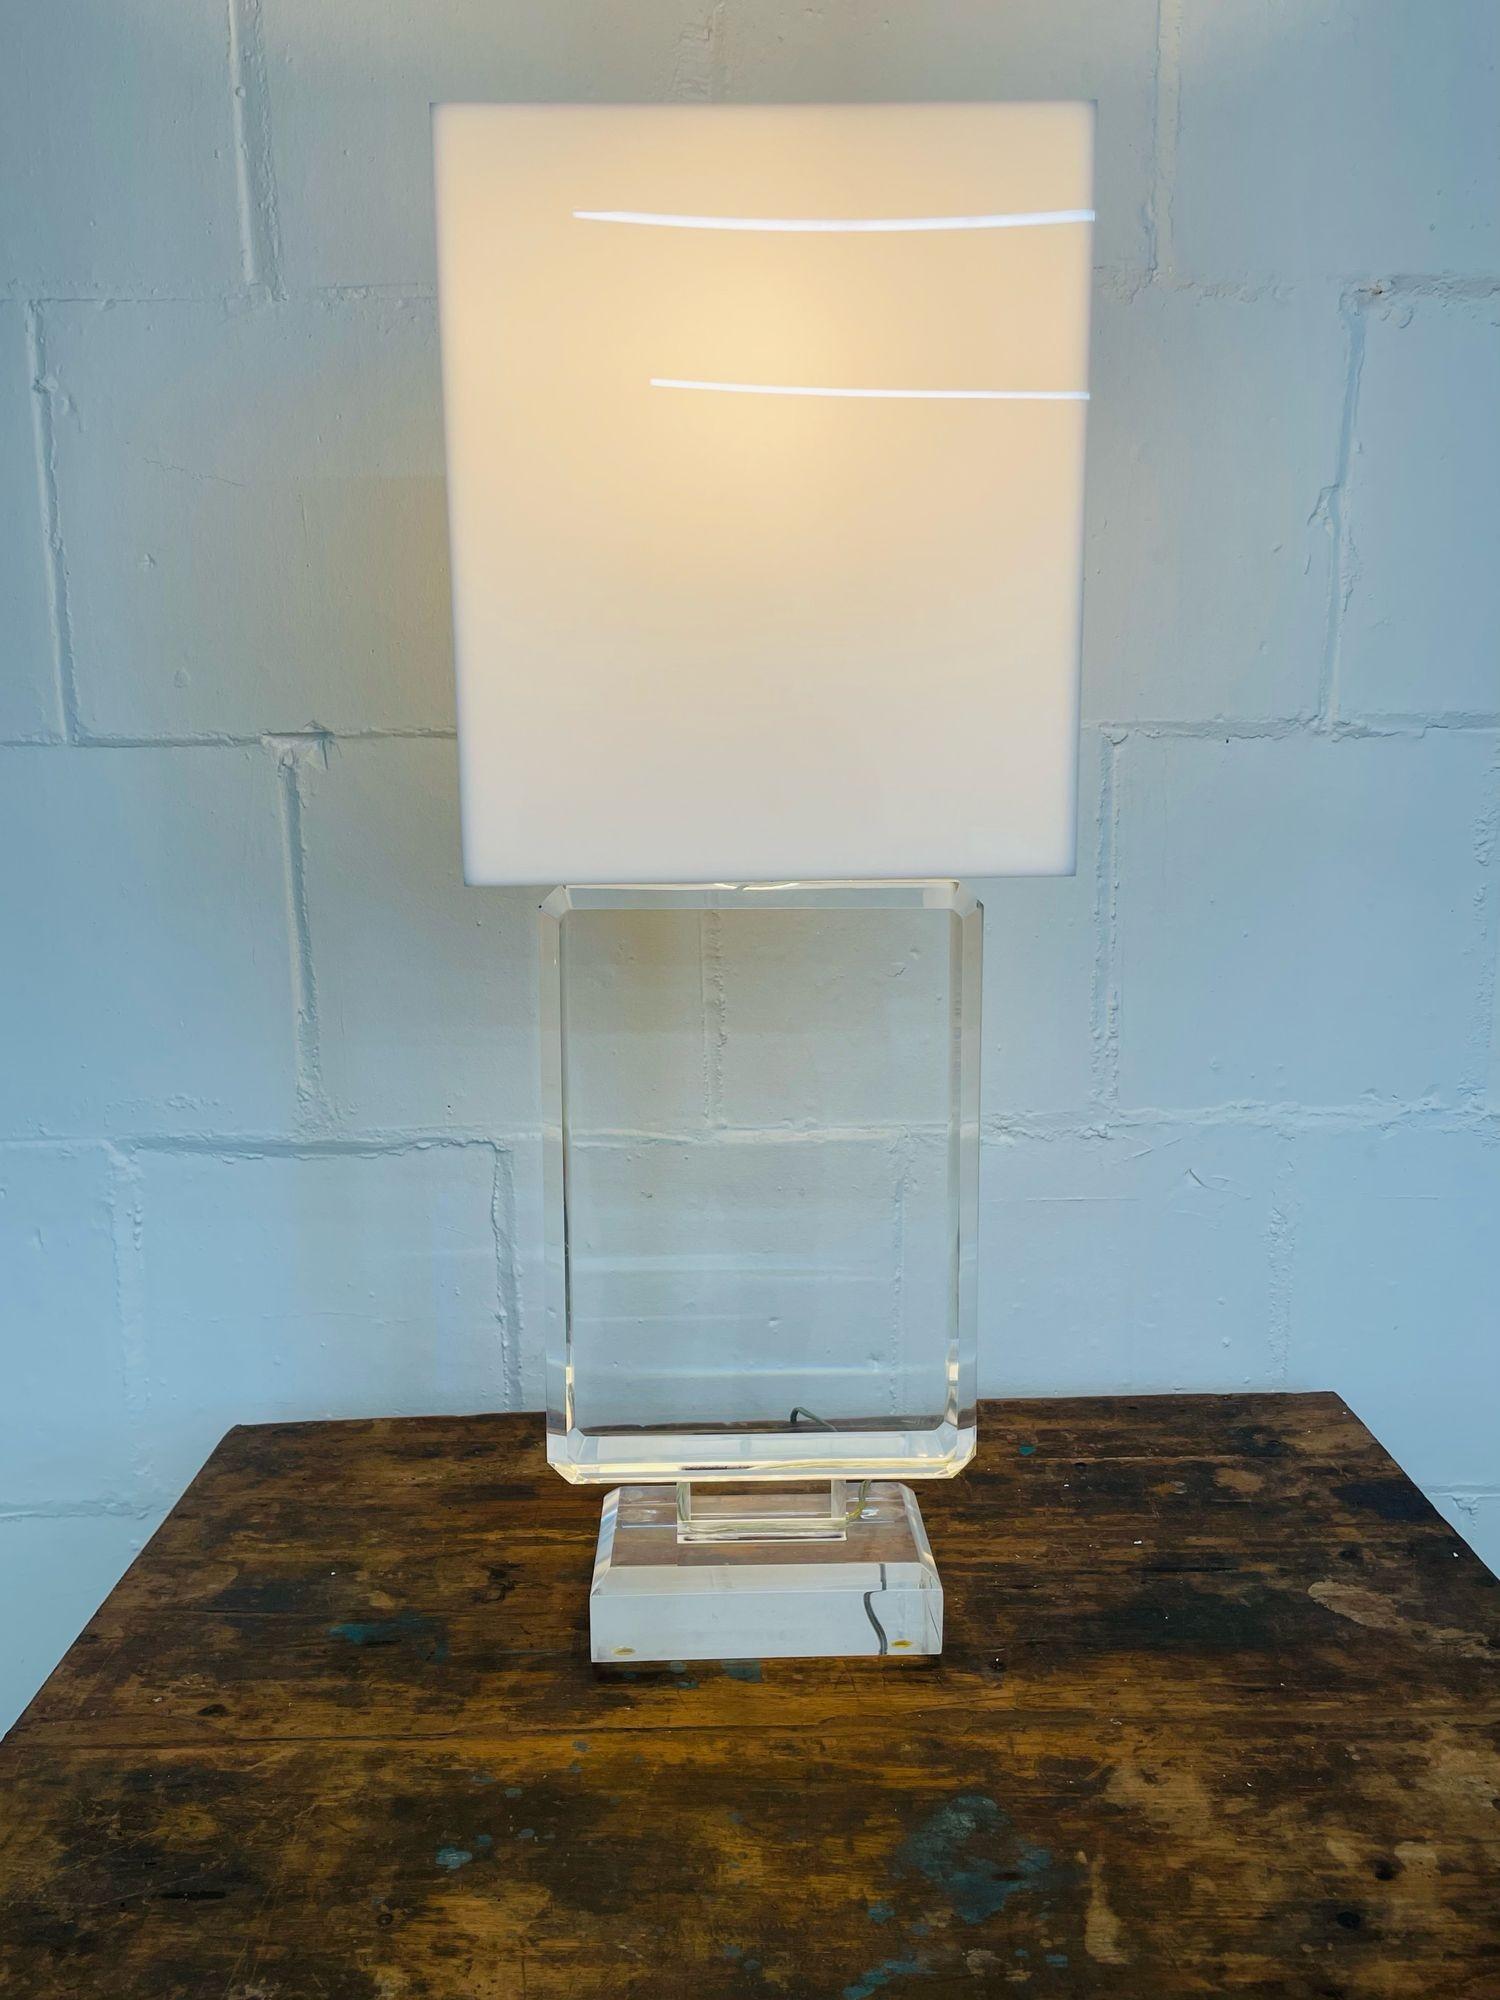 Single Lucite and Brass Mid-Century Modern Art Deco Style Table / Desk Lamp
 
Shade included.
 
Lucite, Brass
United States, 1980s
 
33Hx 12W x 10D
1 x e26 standard sockets.